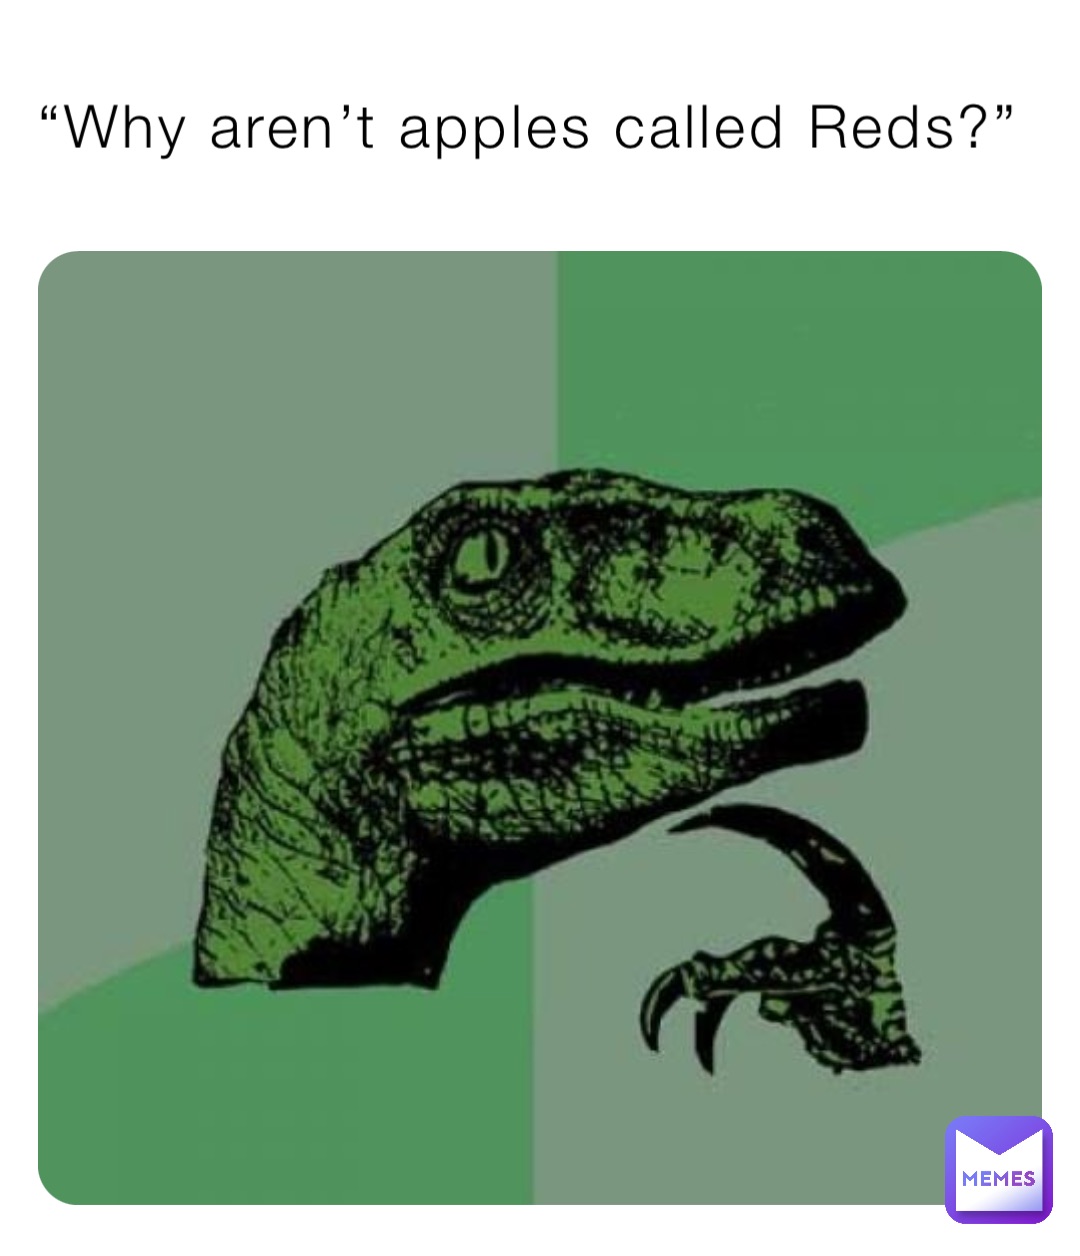 “Why aren’t apples called Reds?”